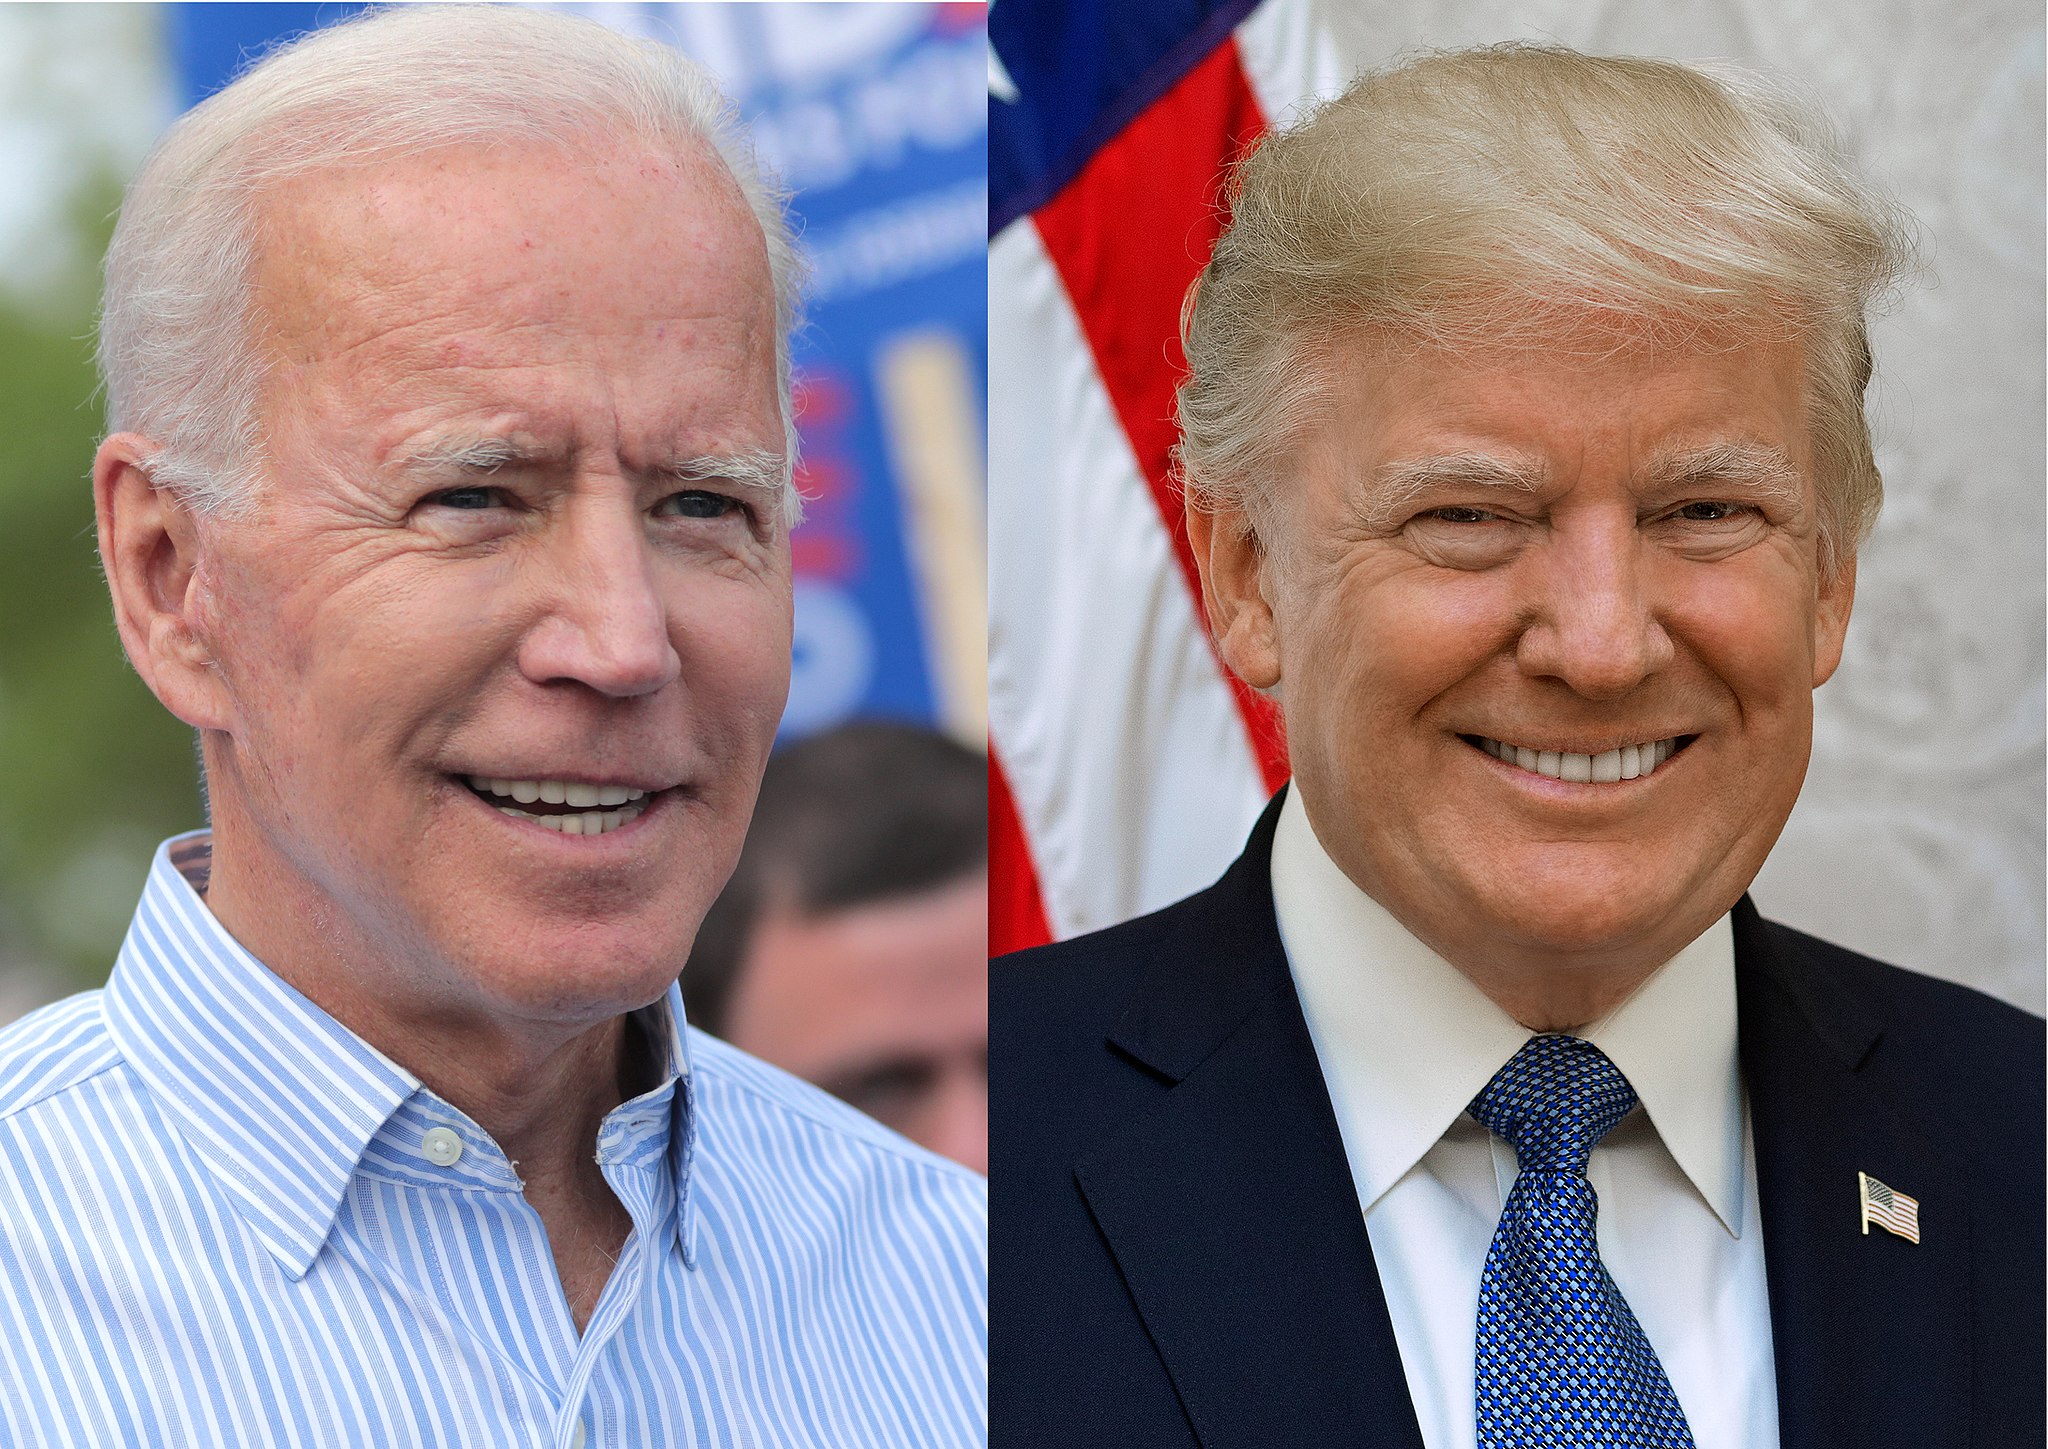 Which President Is The Most Honest: Biden or Trump?